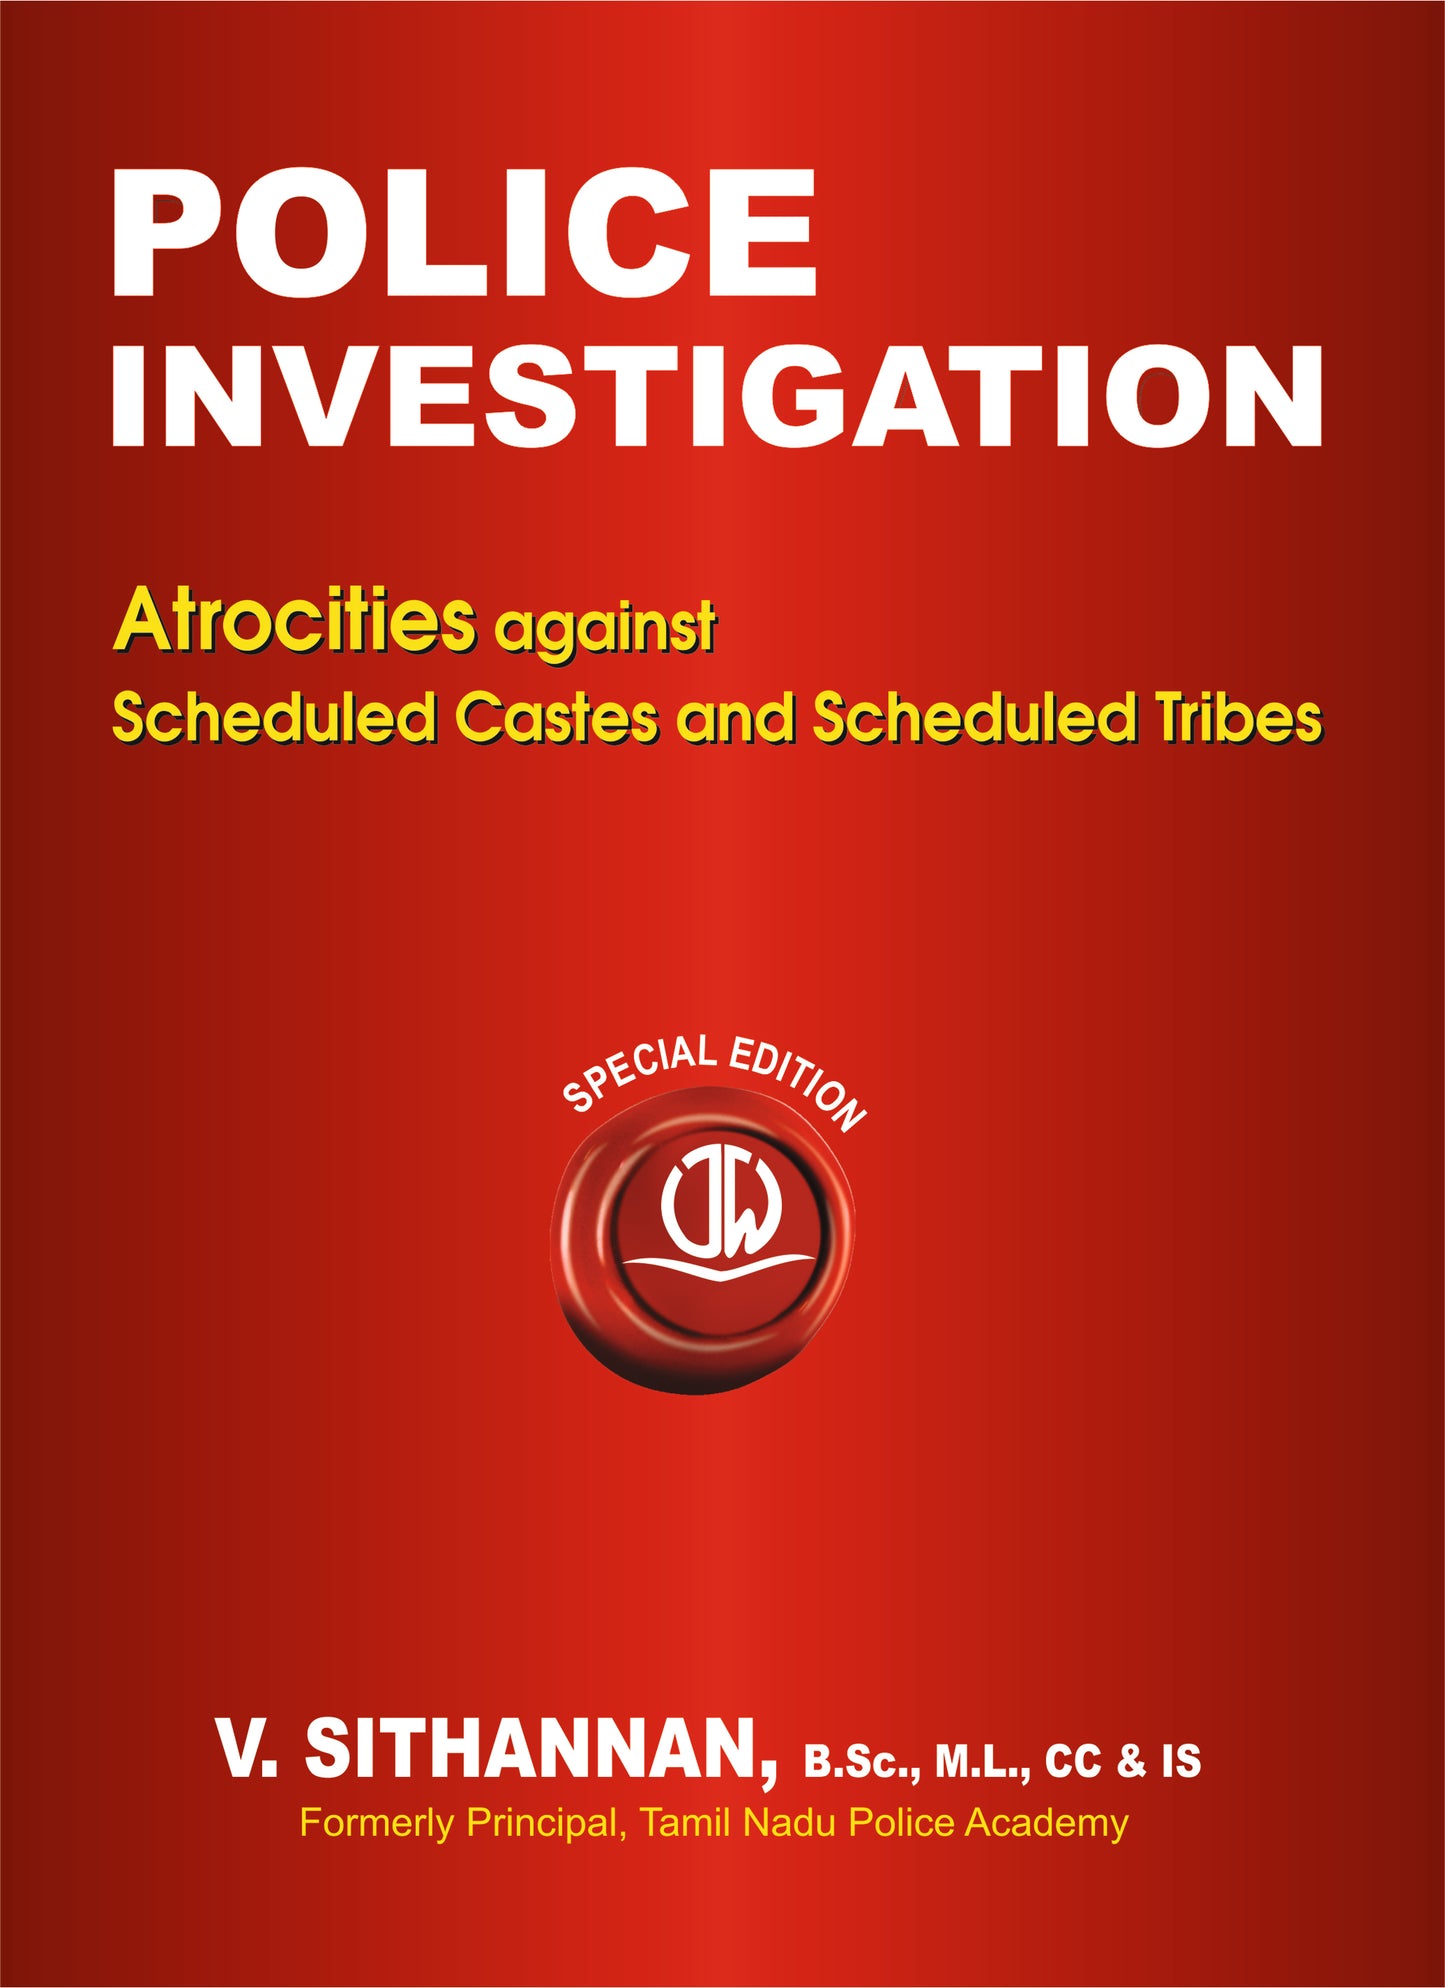 Police Investigation - Atrocities against SCs and STs in English ( A Vade Mecum for all )